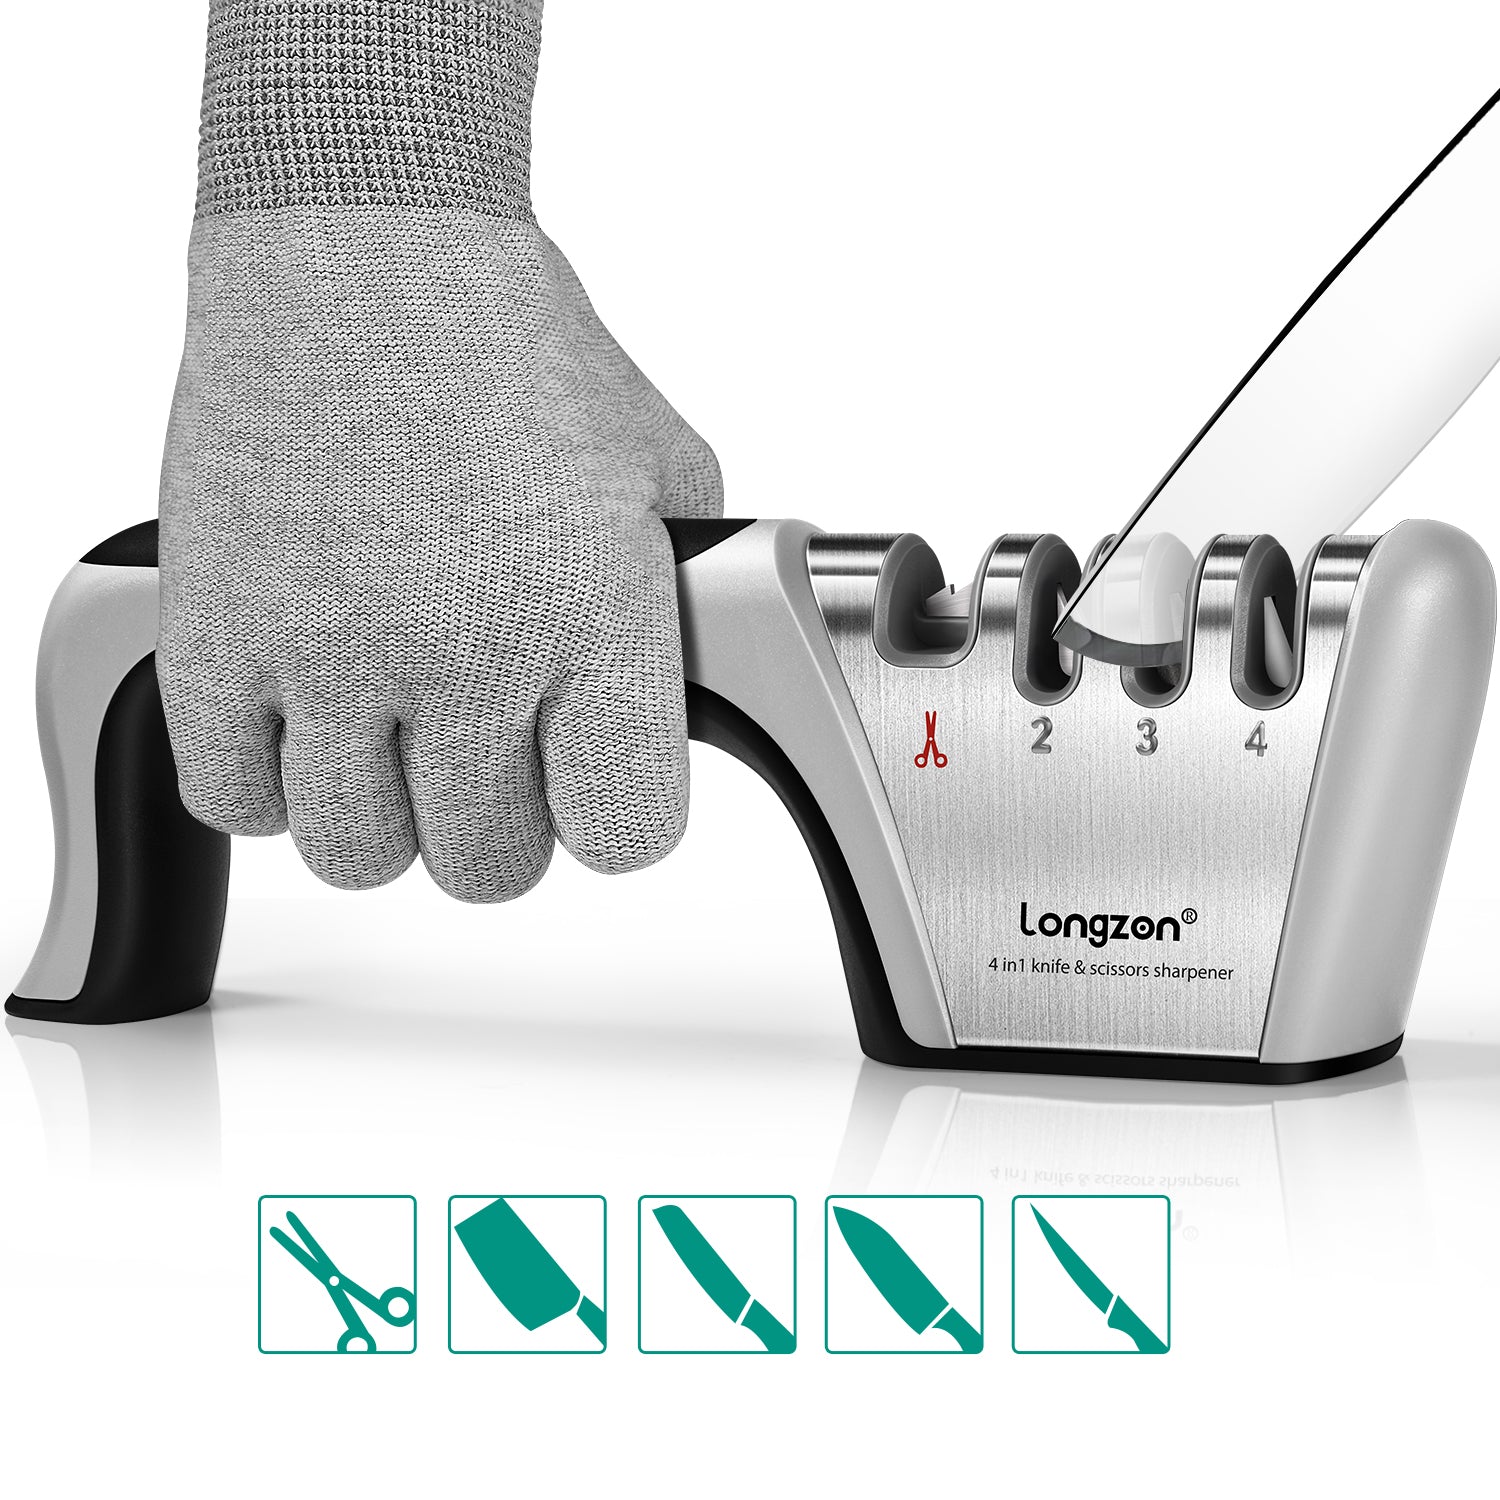 Longzon 4-in-1 [4 stage] Knife Sharpener with a Pair of Cut